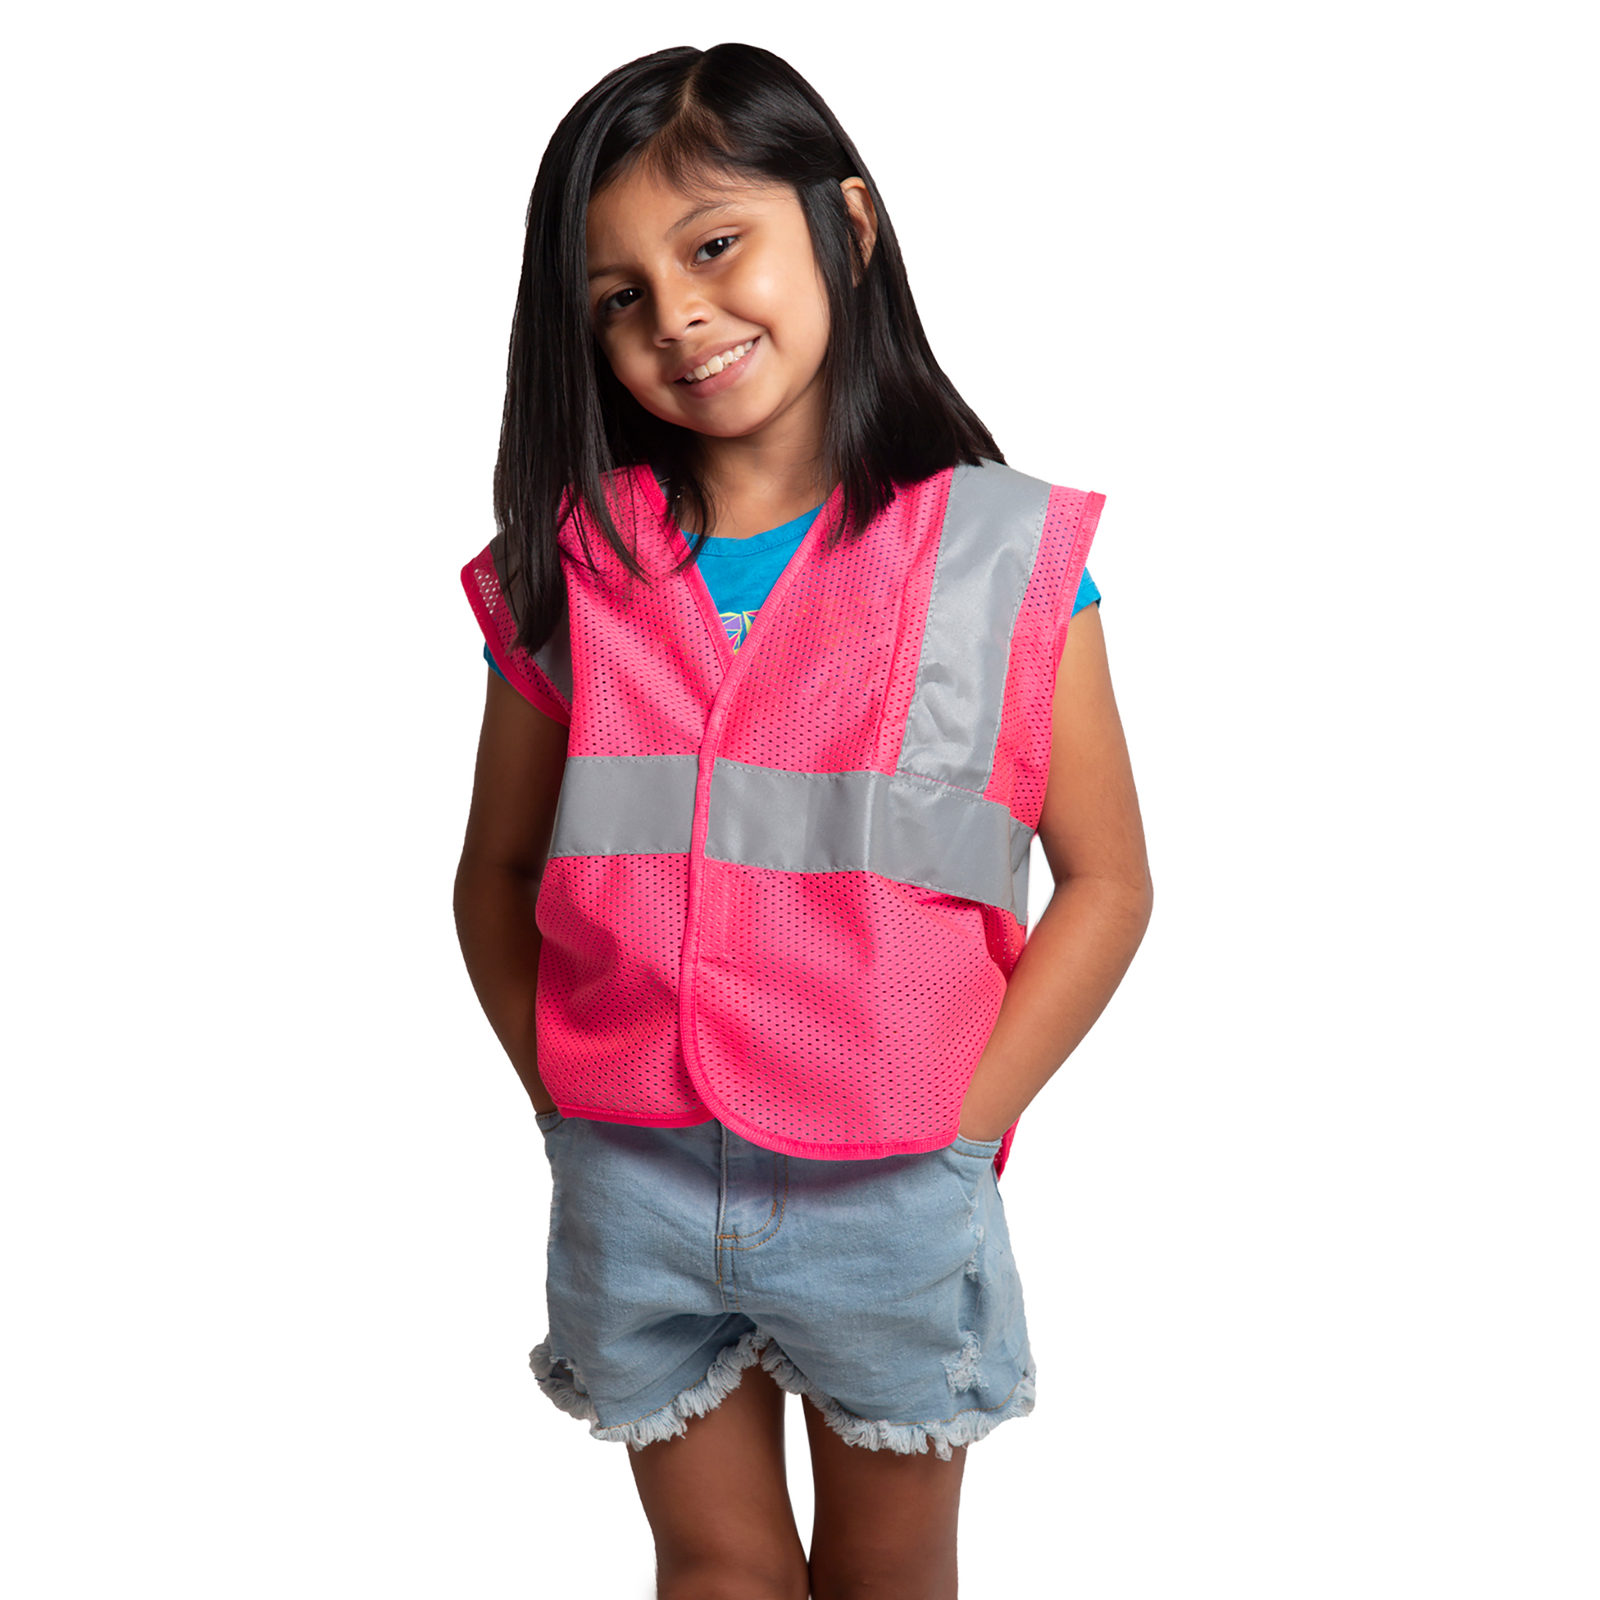 A girl wearing a pink reflective safety vest